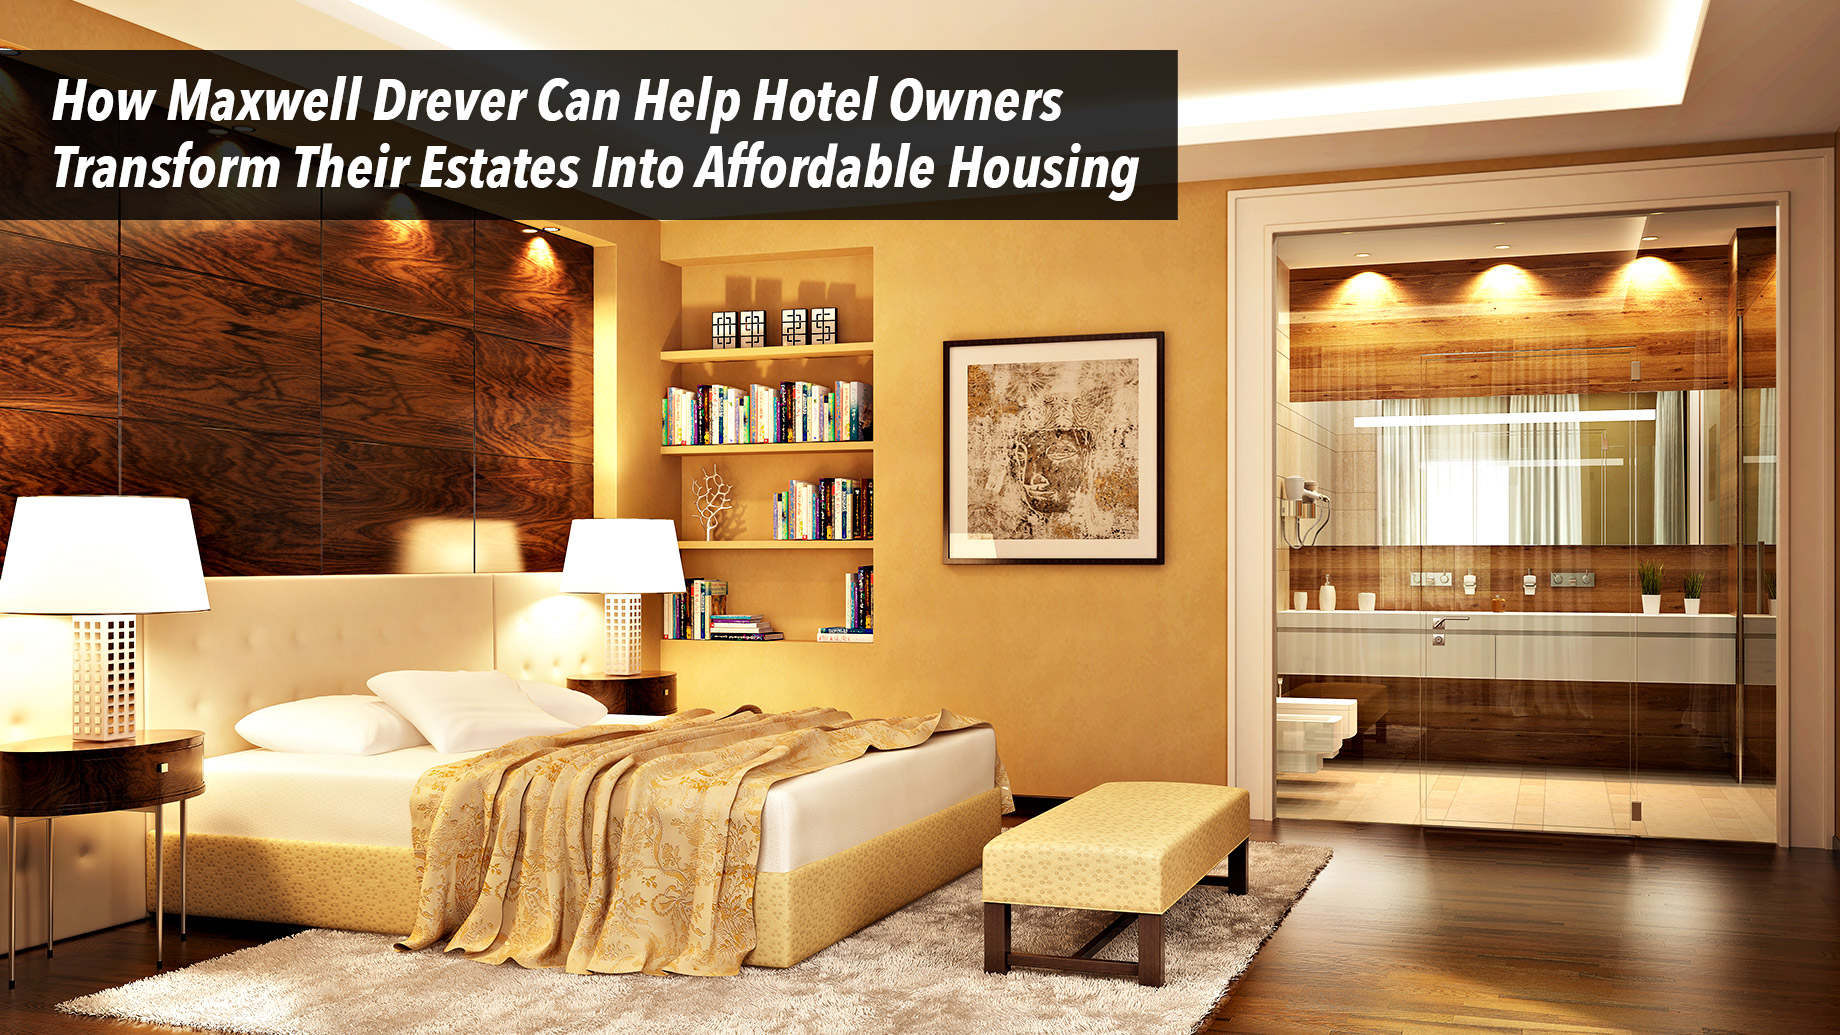 How Maxwell Drever Can Help Hotel Owners Transform Their Estates Into Affordable Housing